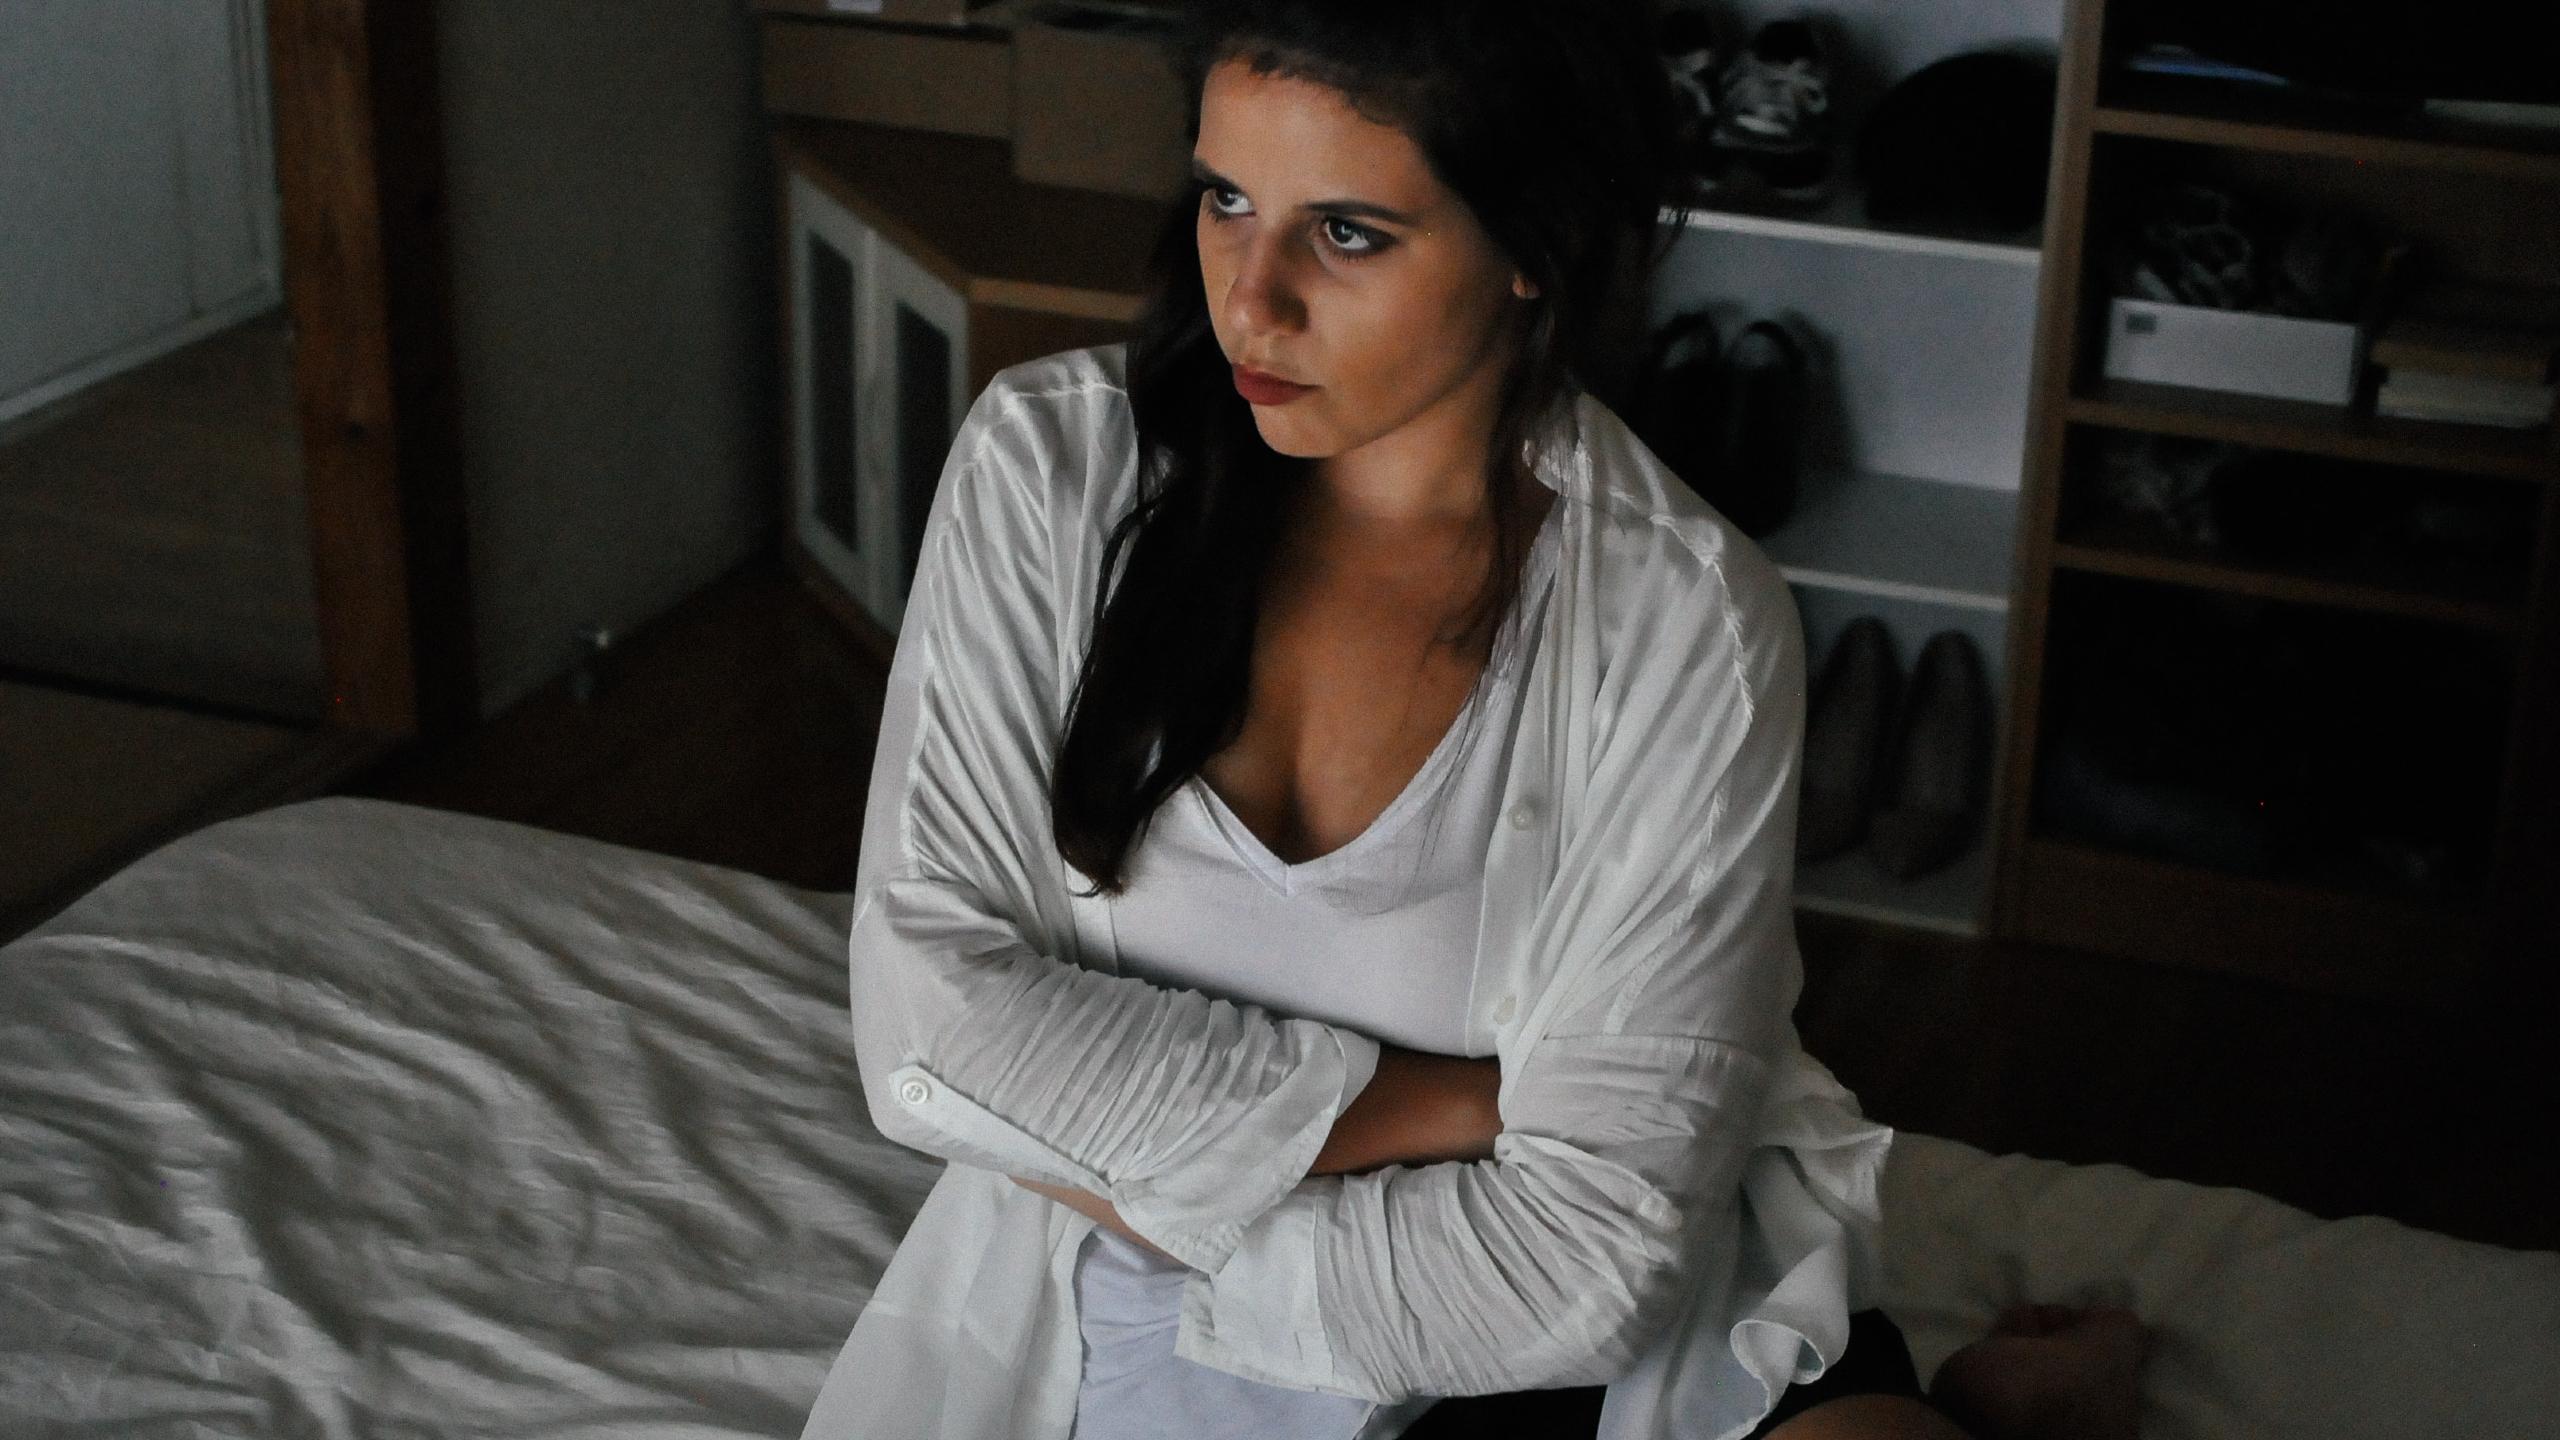 Woman sitting on a bed with her arms crossed looking frustratedWoman sitting on a bed with her arms crossed looking frustrated